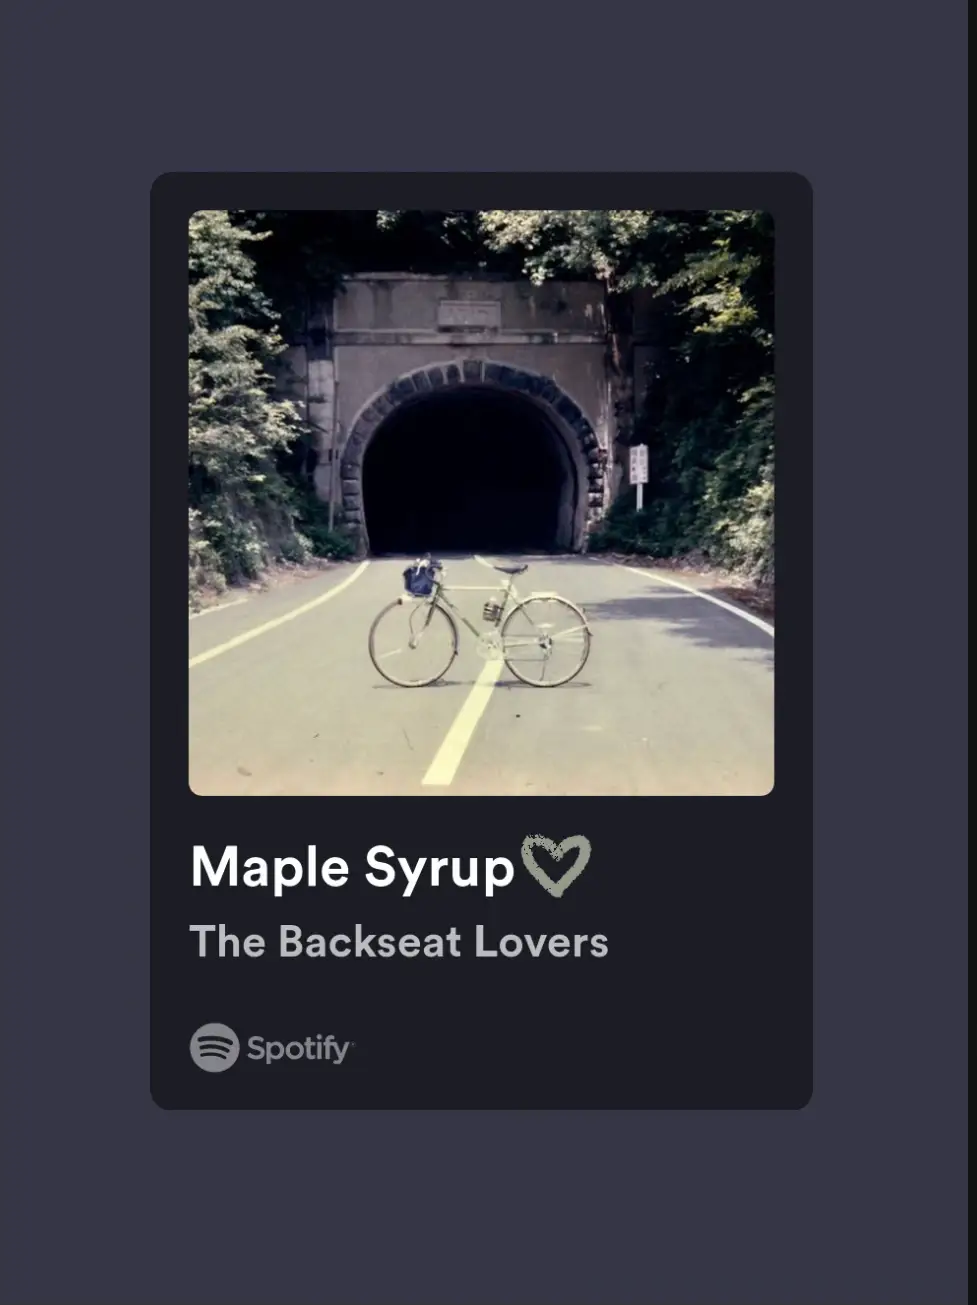  A Spotify playlist of the song Maple Syrup.